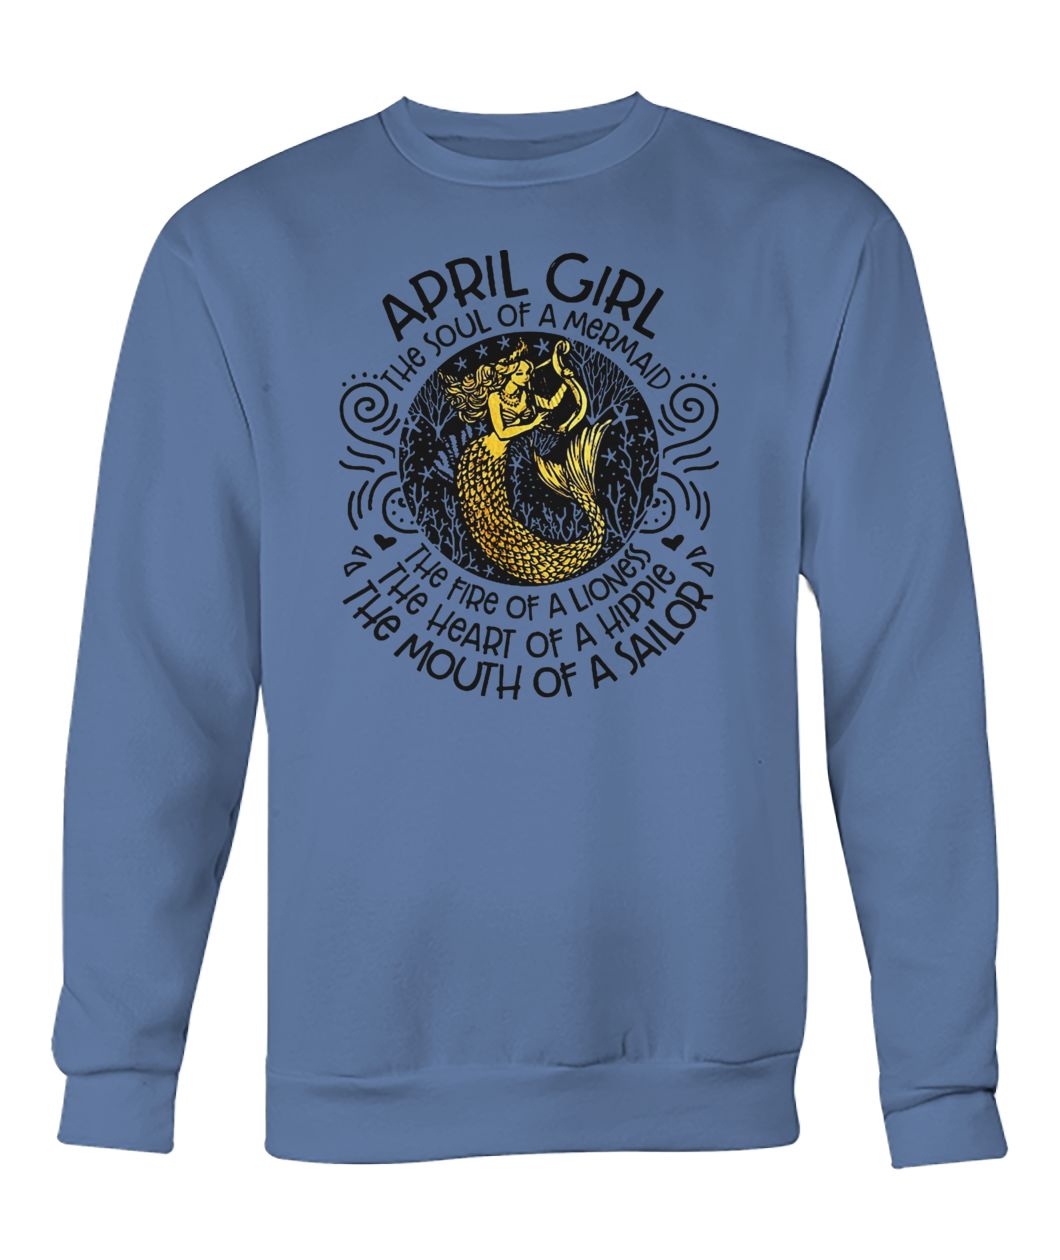 April girl the soul of a mermaid the fire of a lioness crew neck sweatshirt